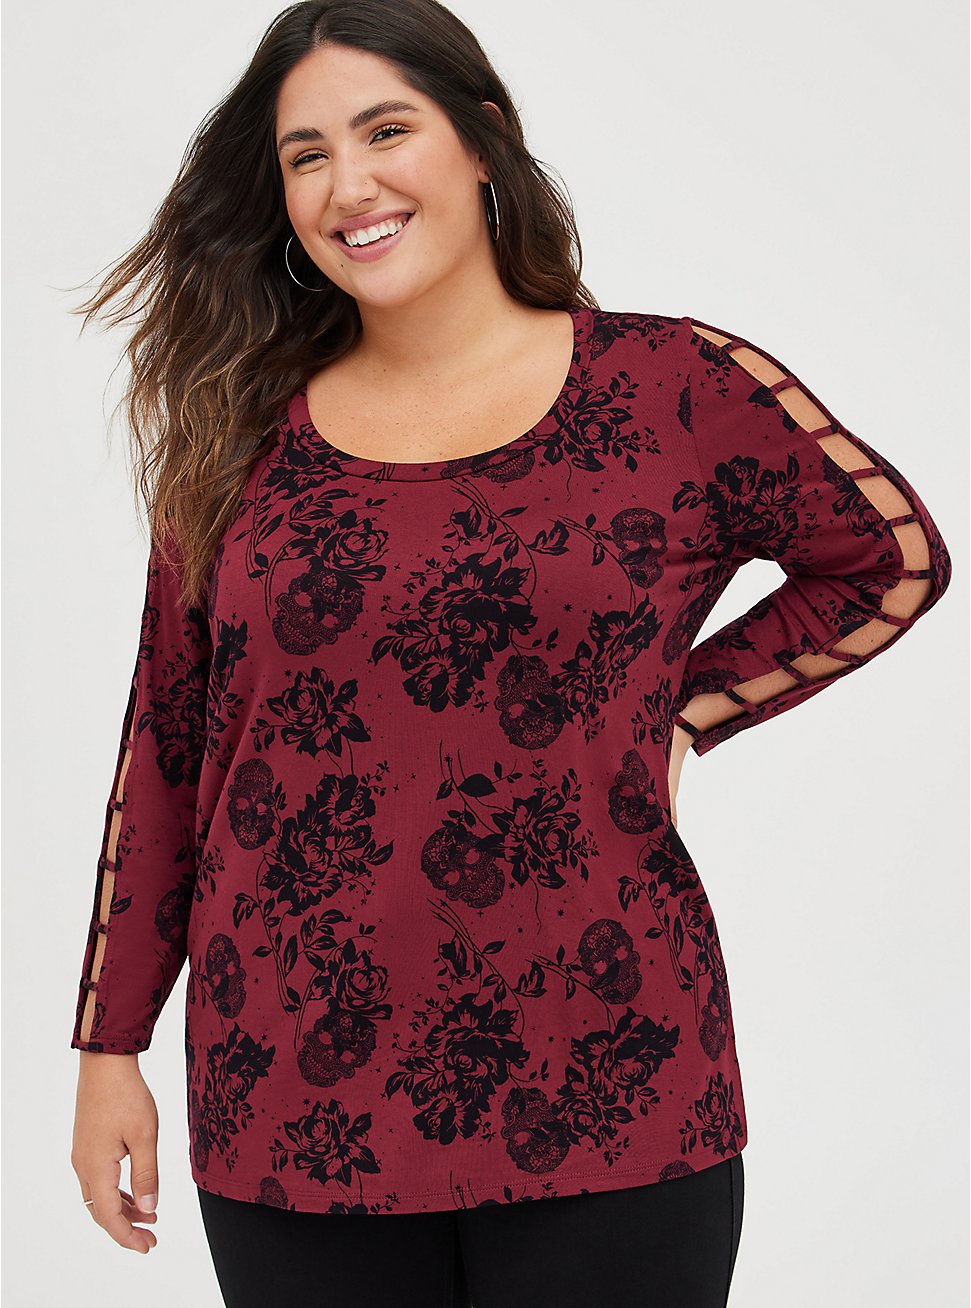 Plus Size Strappy Sleeve Top - Super Soft Floral Wine , OTHER PRINTS, hi-res